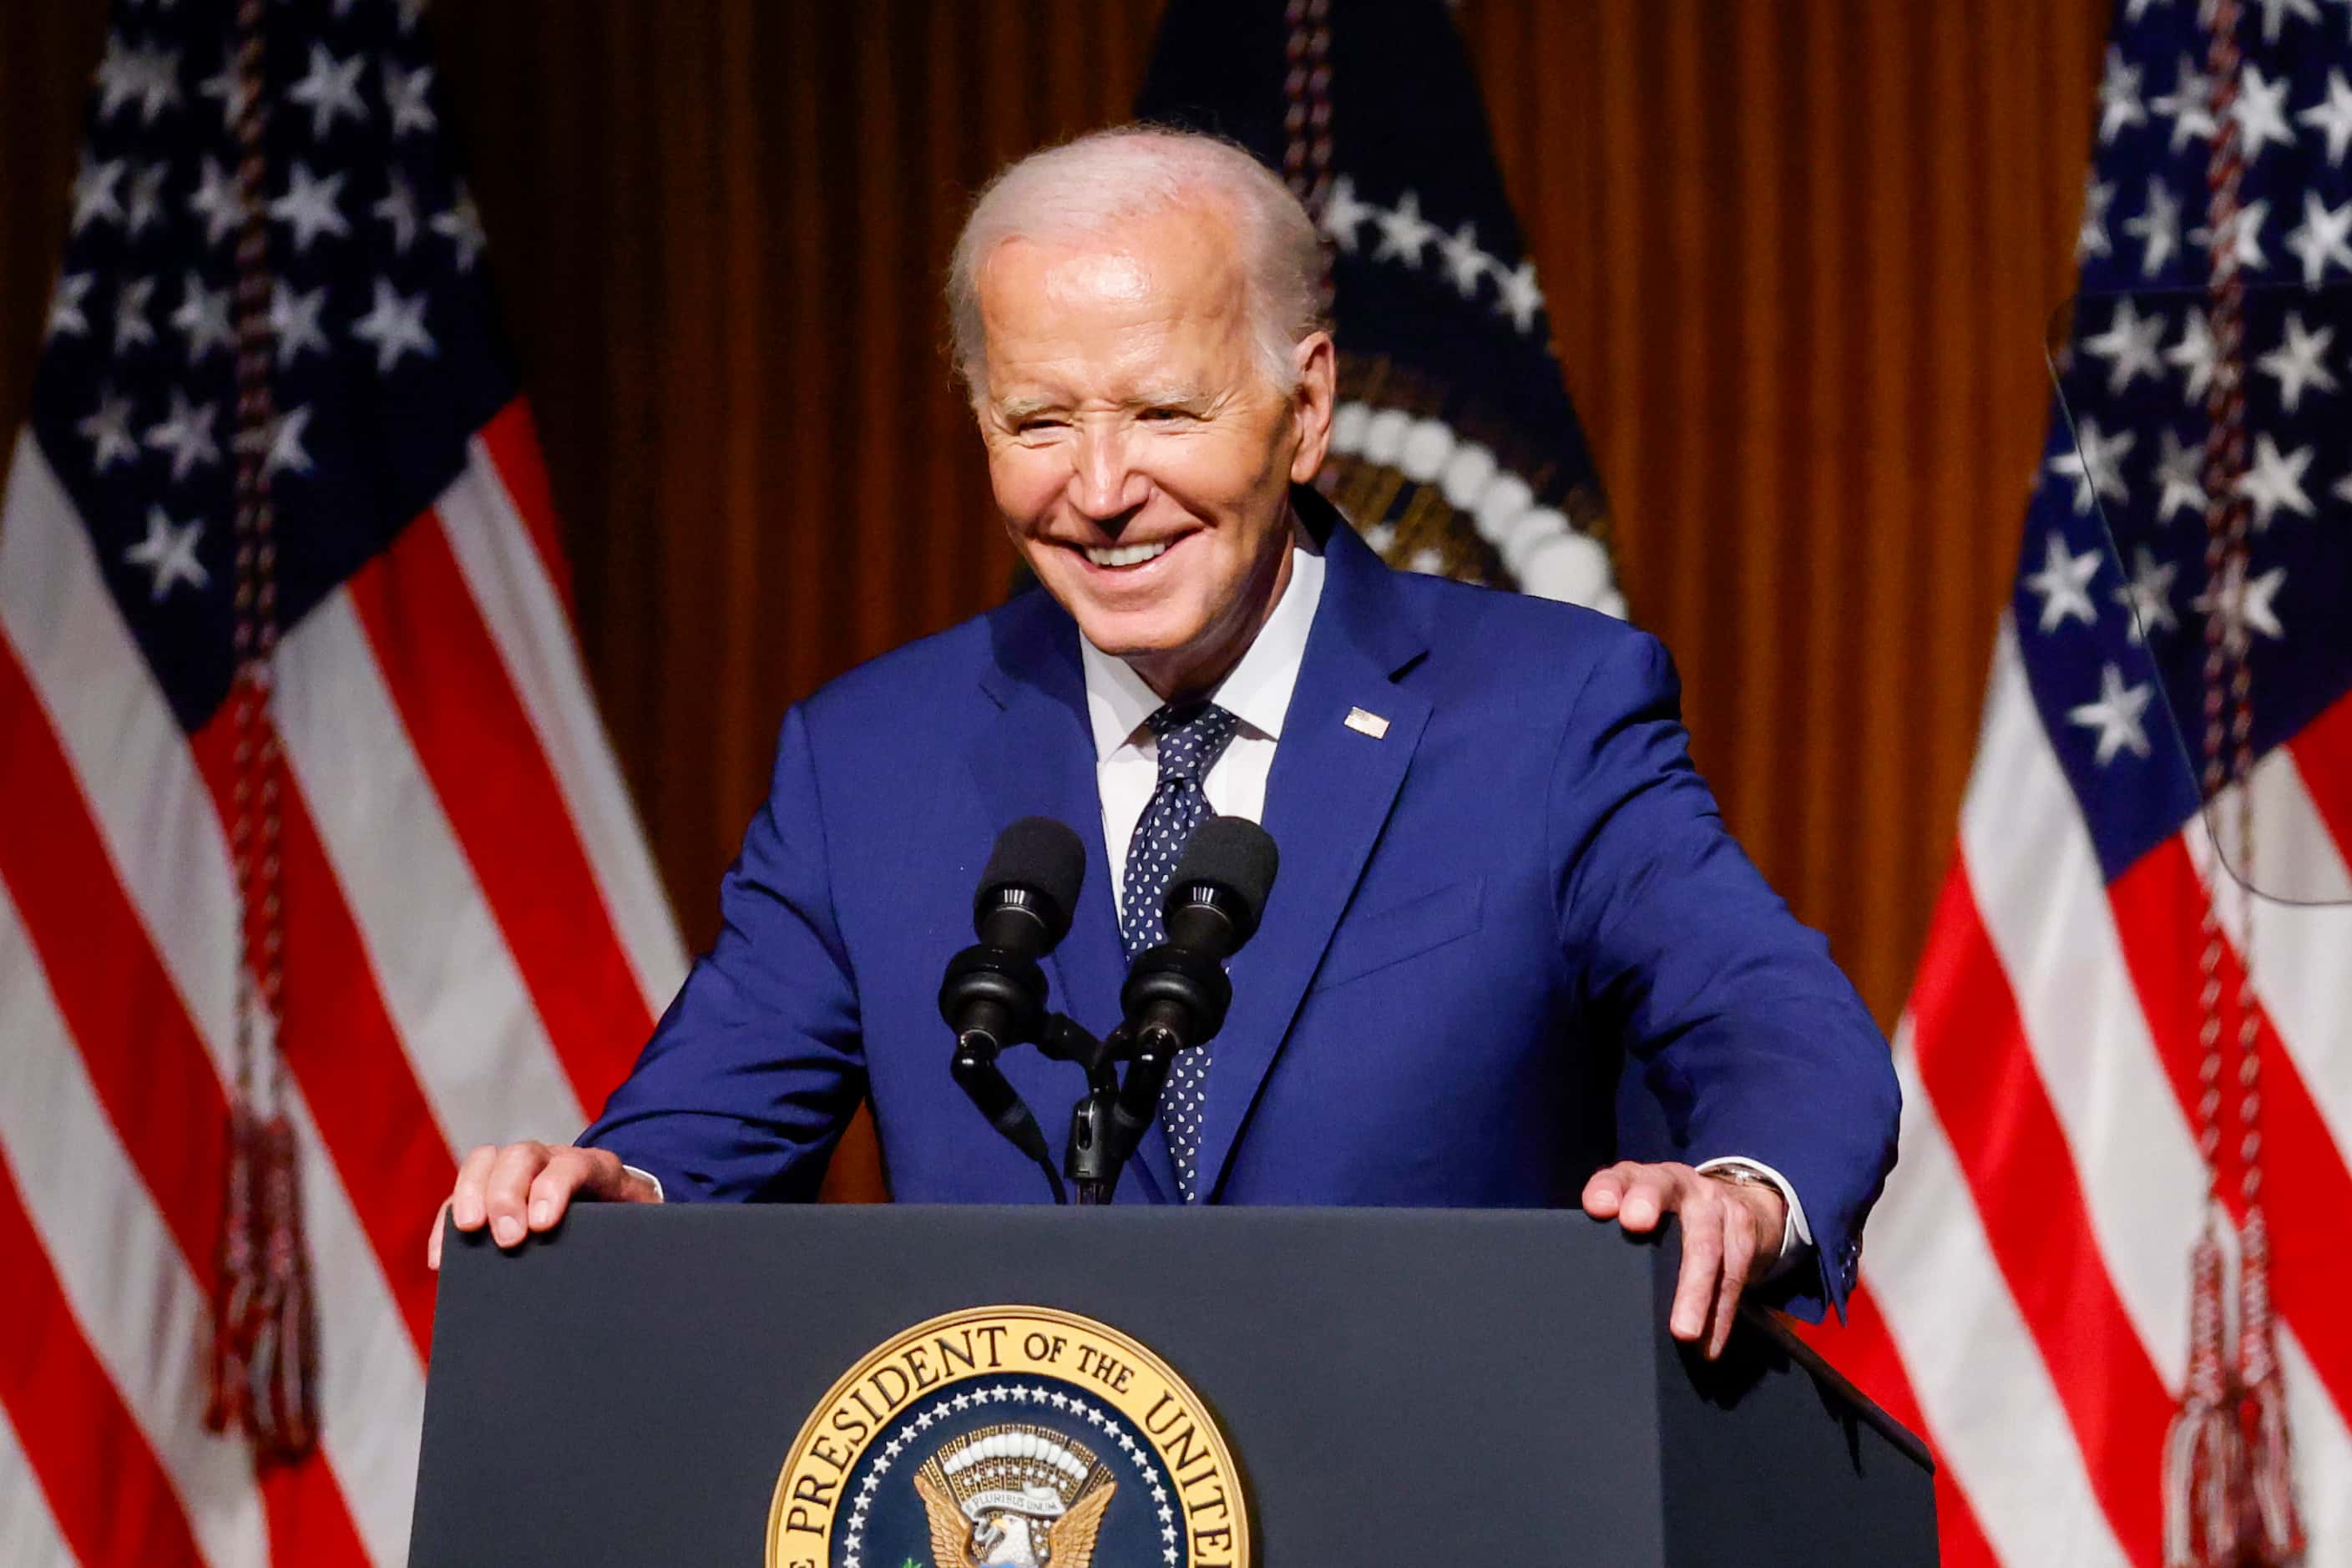 President Joe Biden smiles as he takes the podium to deliver the keynote address during an...